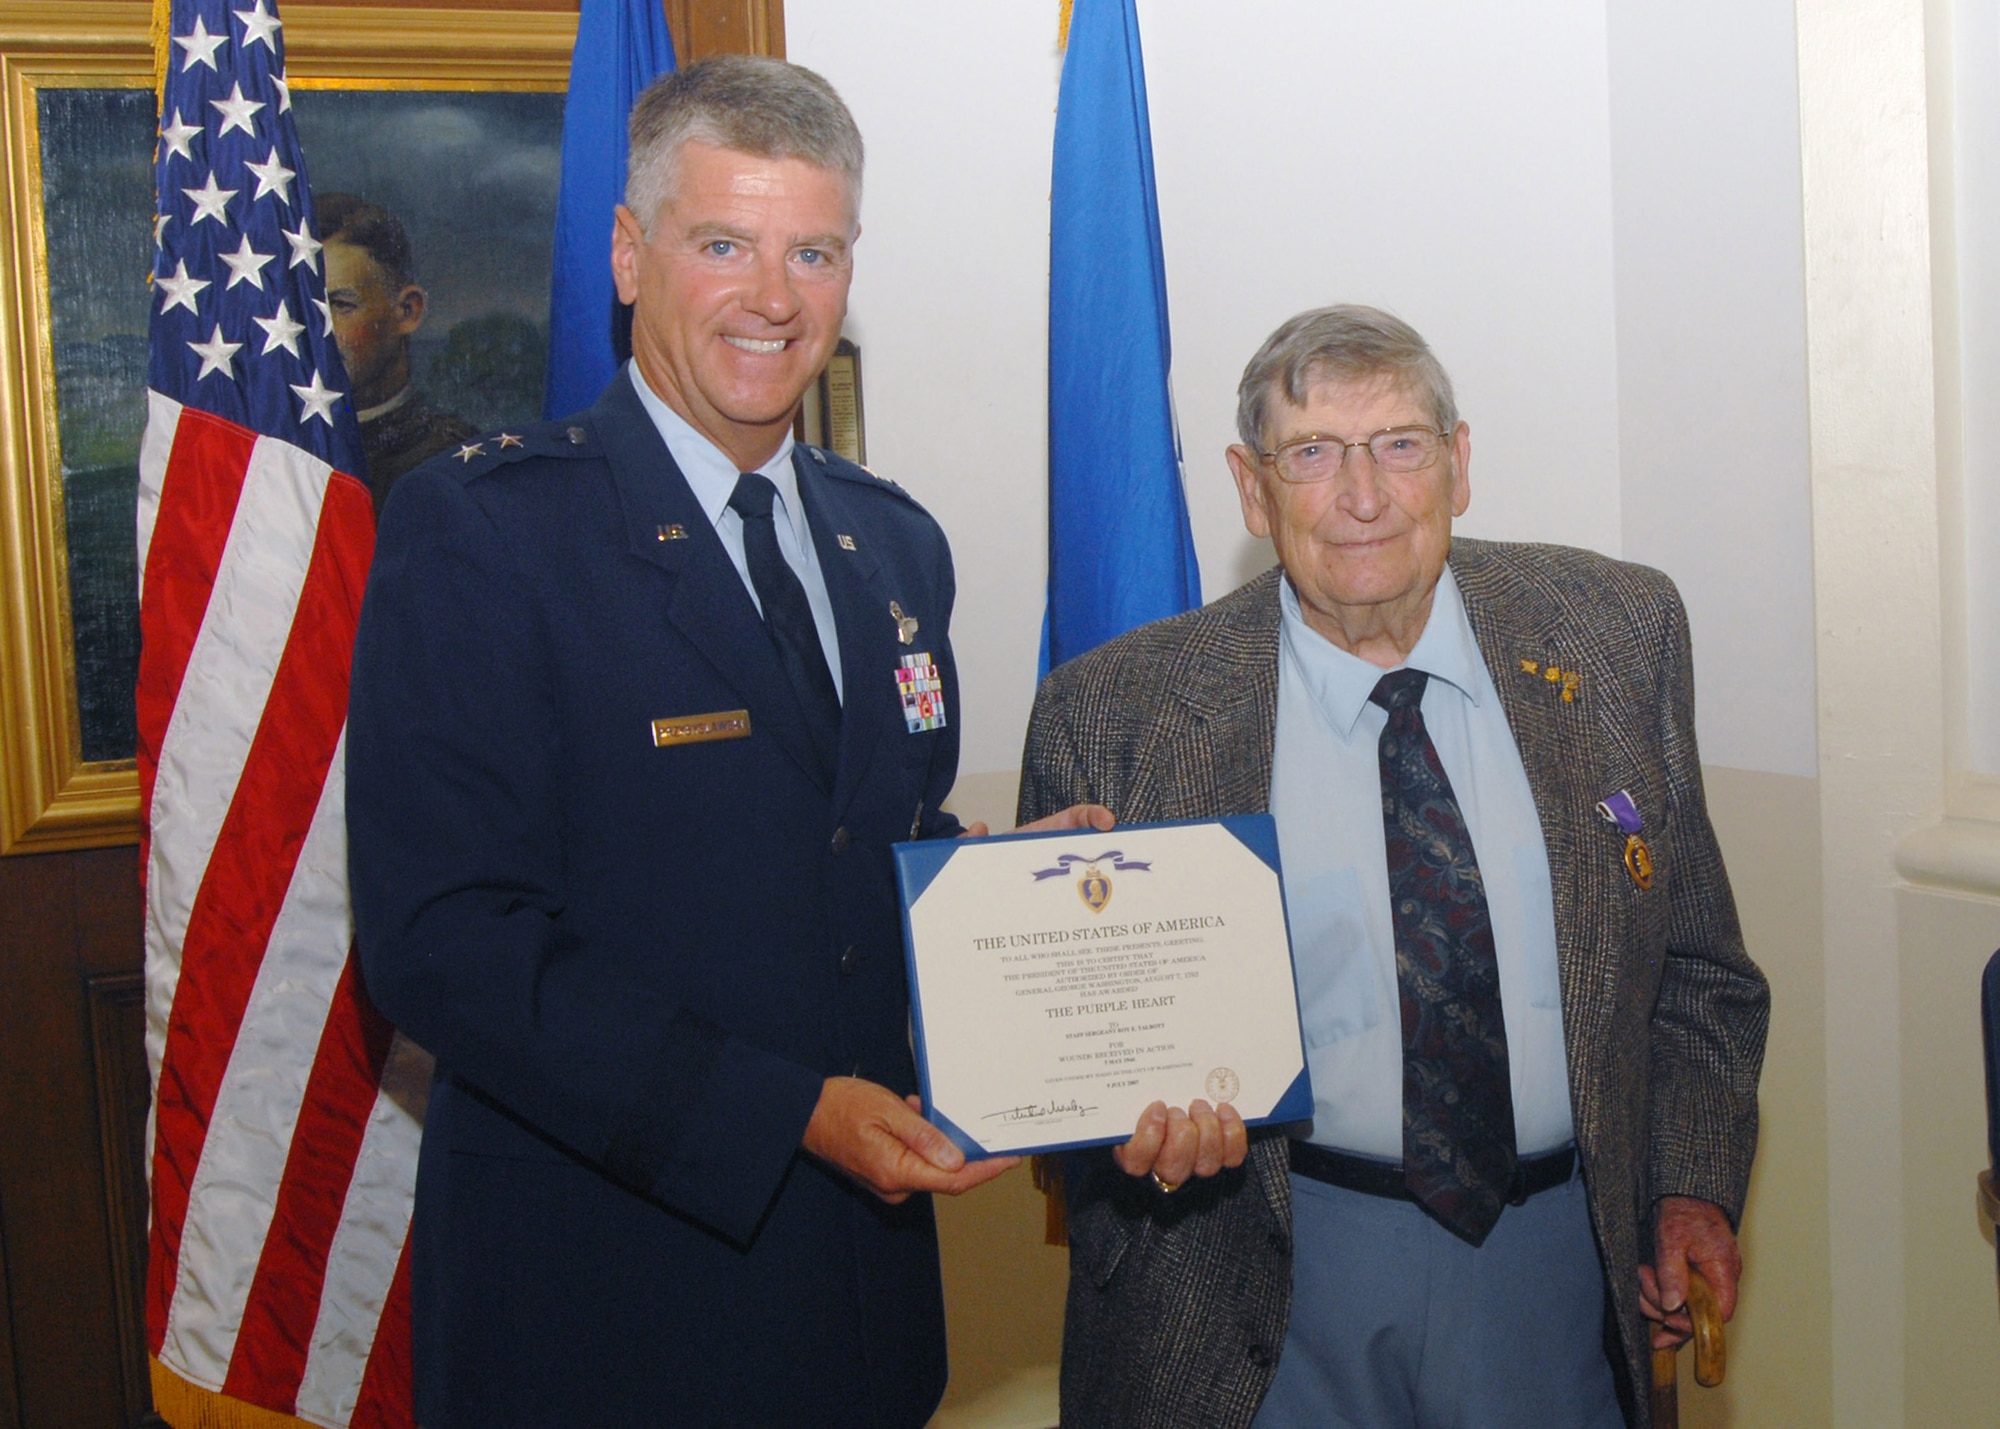 Maj. Gen. Anthony Przybyslawski stands with Roy E. Talbott after presenting him with a Purple Heart Aug. 21 at Randolph Air Force Base, Texas. Mr. Talbott served as a B-24 gunner with the 72nd Bomb Squadron of the 13th Air Force's 5th Bomb Group, and received the Purple Heart for injuries he received in an attack by Japanese fighter planes in the Pacific Theater during World War II. The general is the Air Force Personnel Center commander. (U.S. Air Force photo/Steve White)